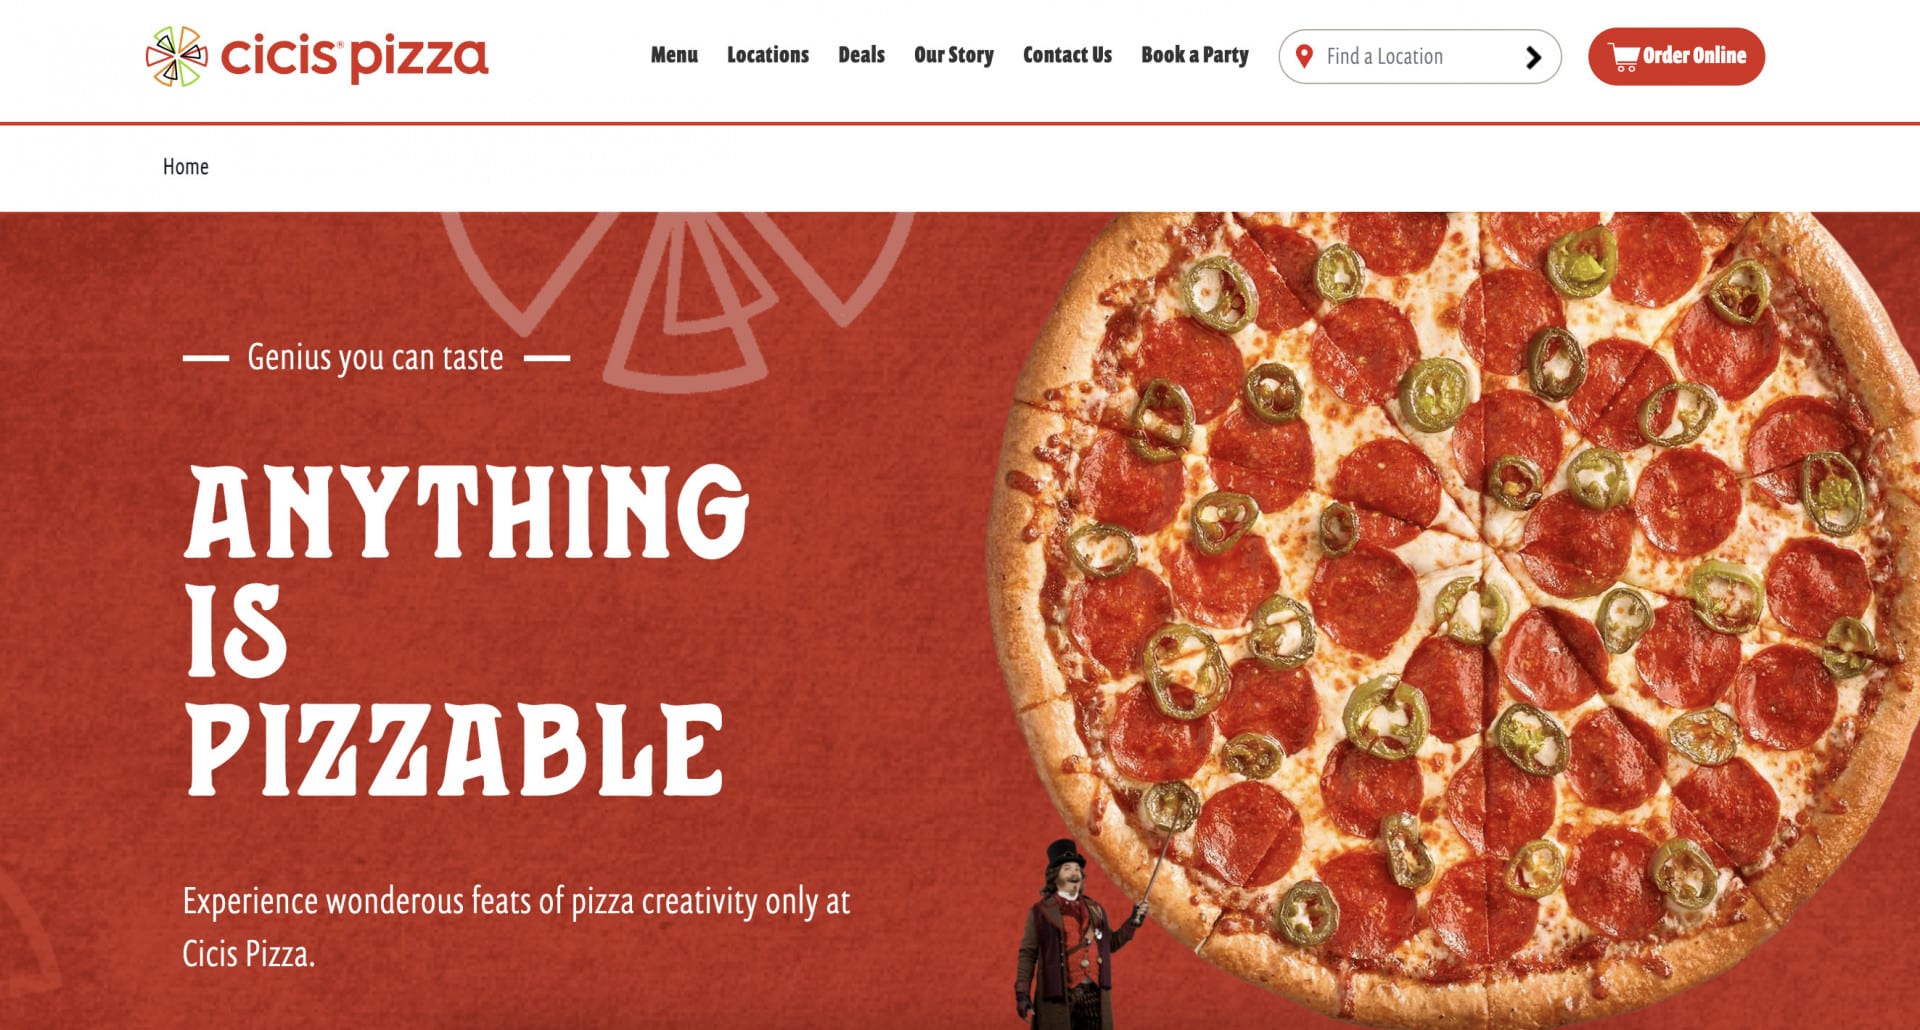 What type of website would work best for pizza business?